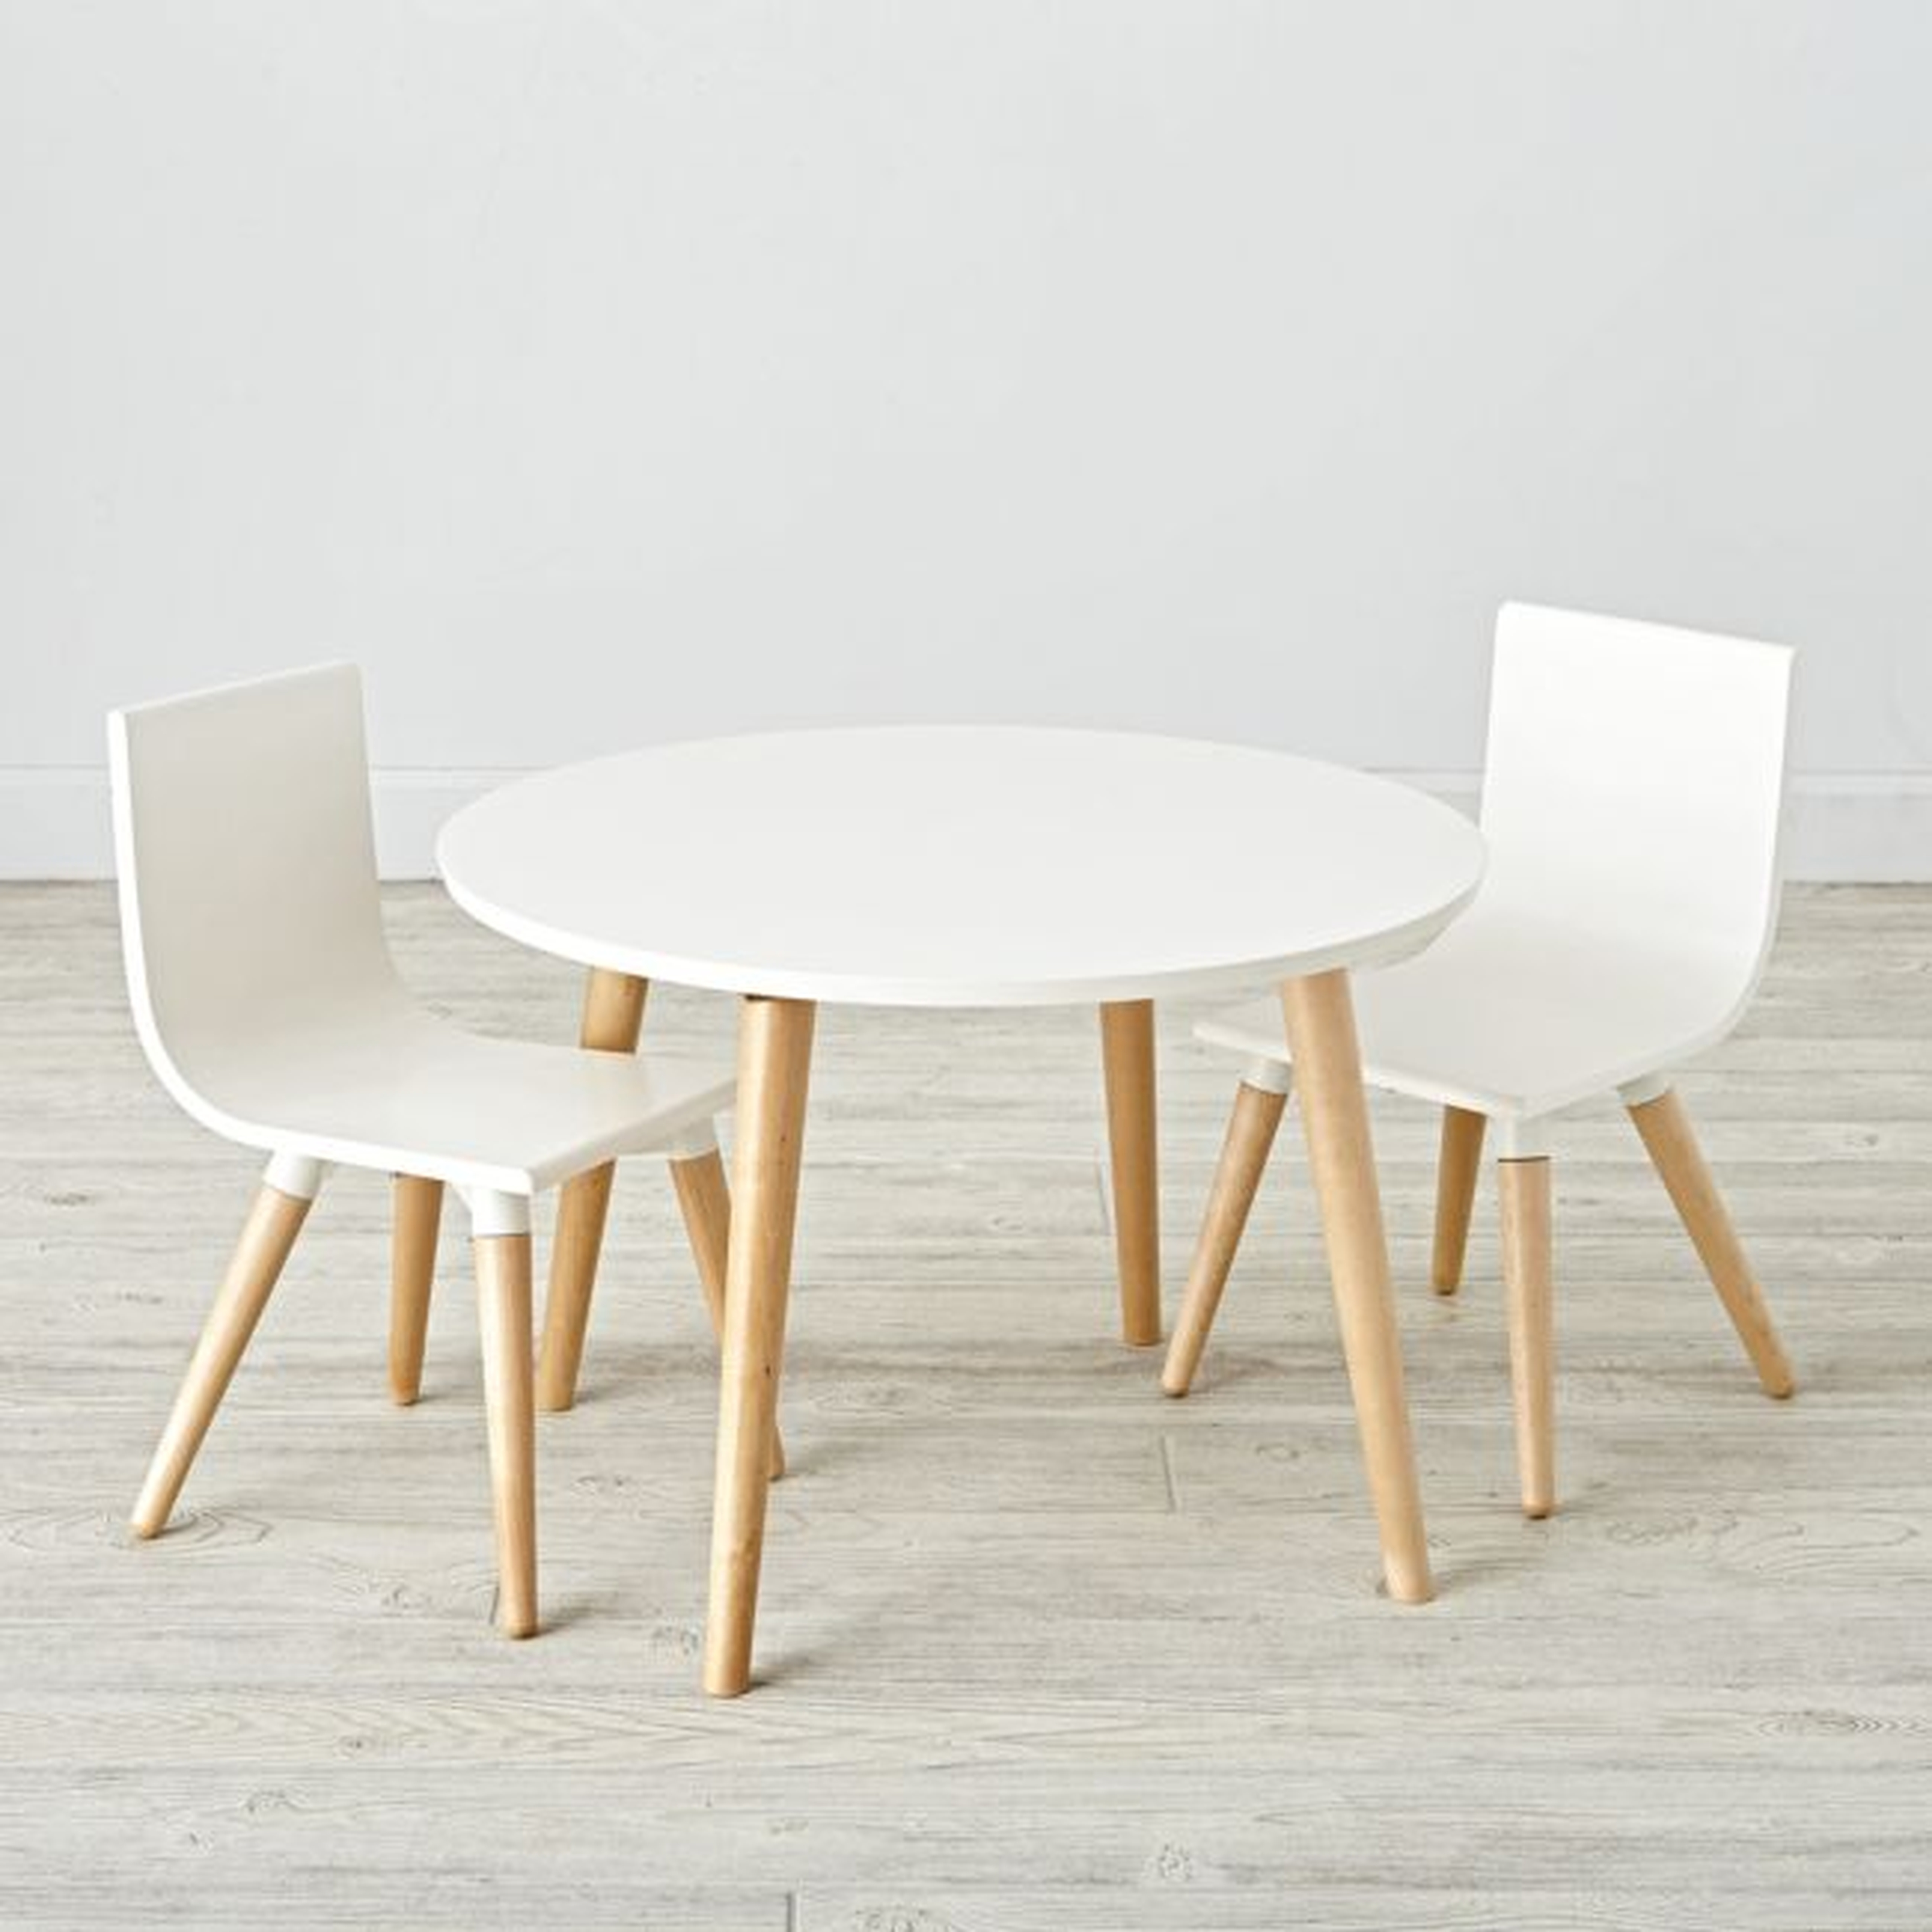 Pint Sized White Toddler Table and Chair Set - Crate and Barrel